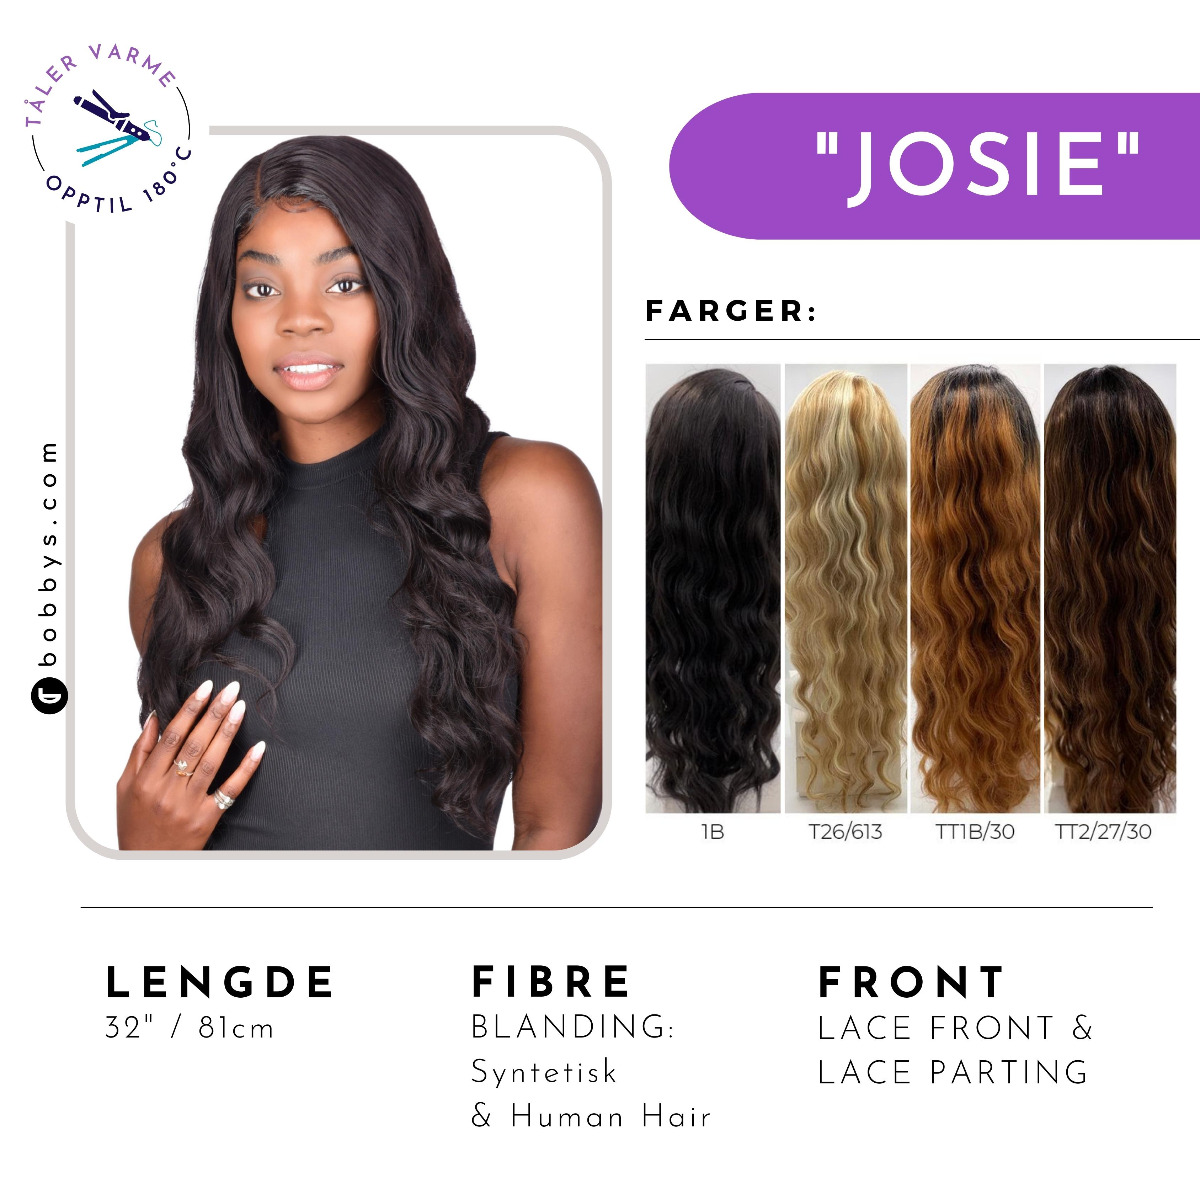 Josie SP Lace Parting Wig Mix Hair-40114